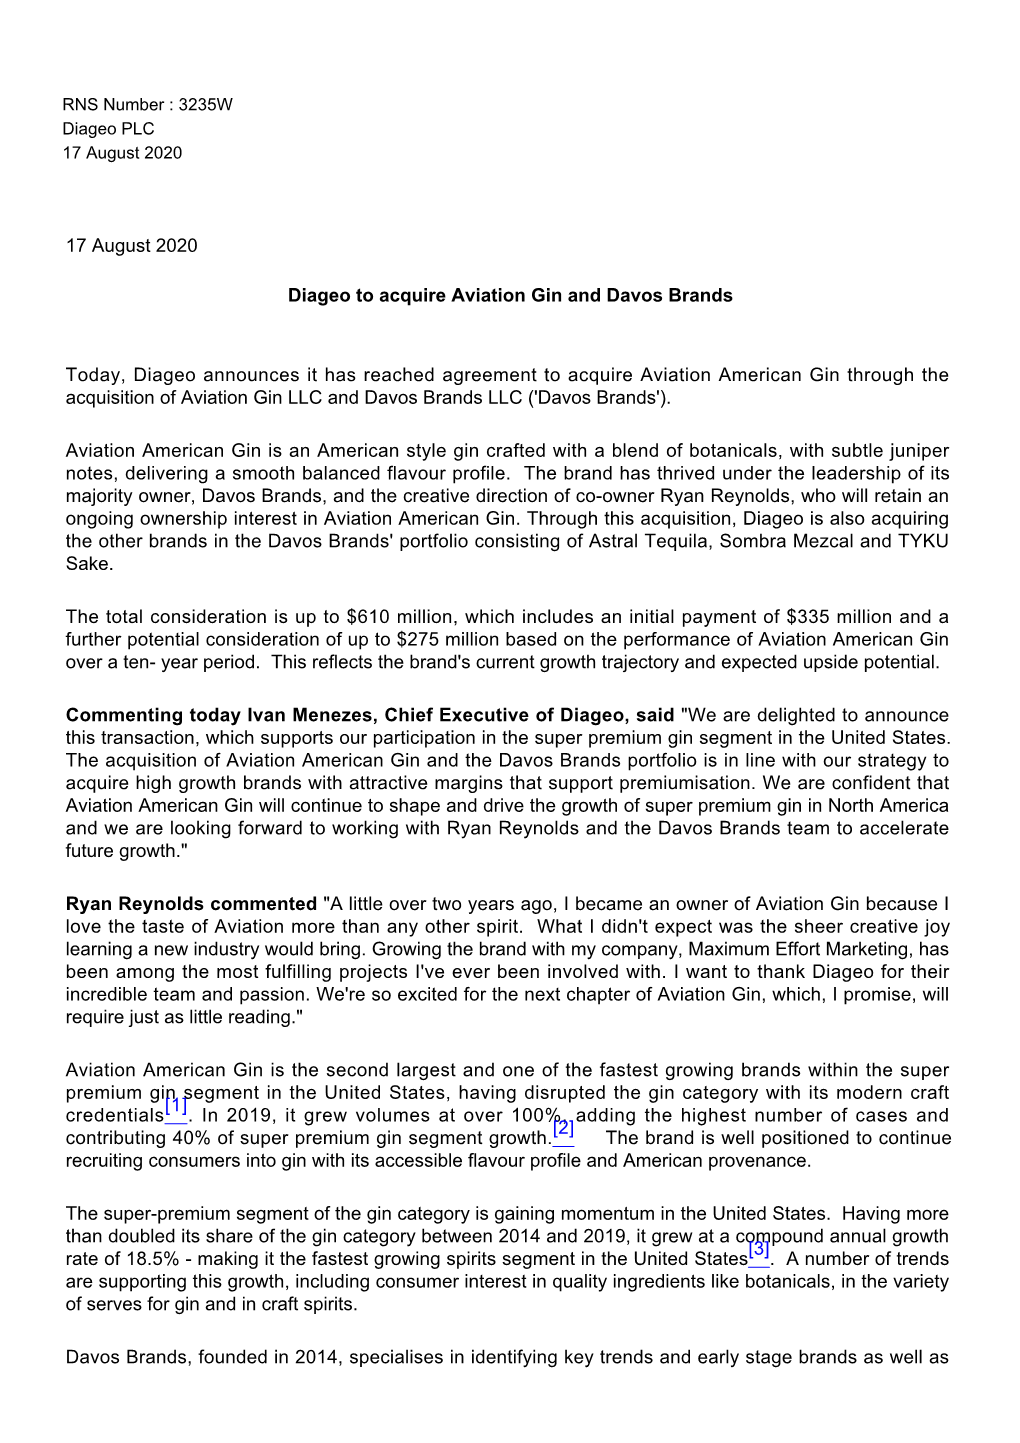 17 August 2020 Diageo to Acquire Aviation Gin and Davos Brands